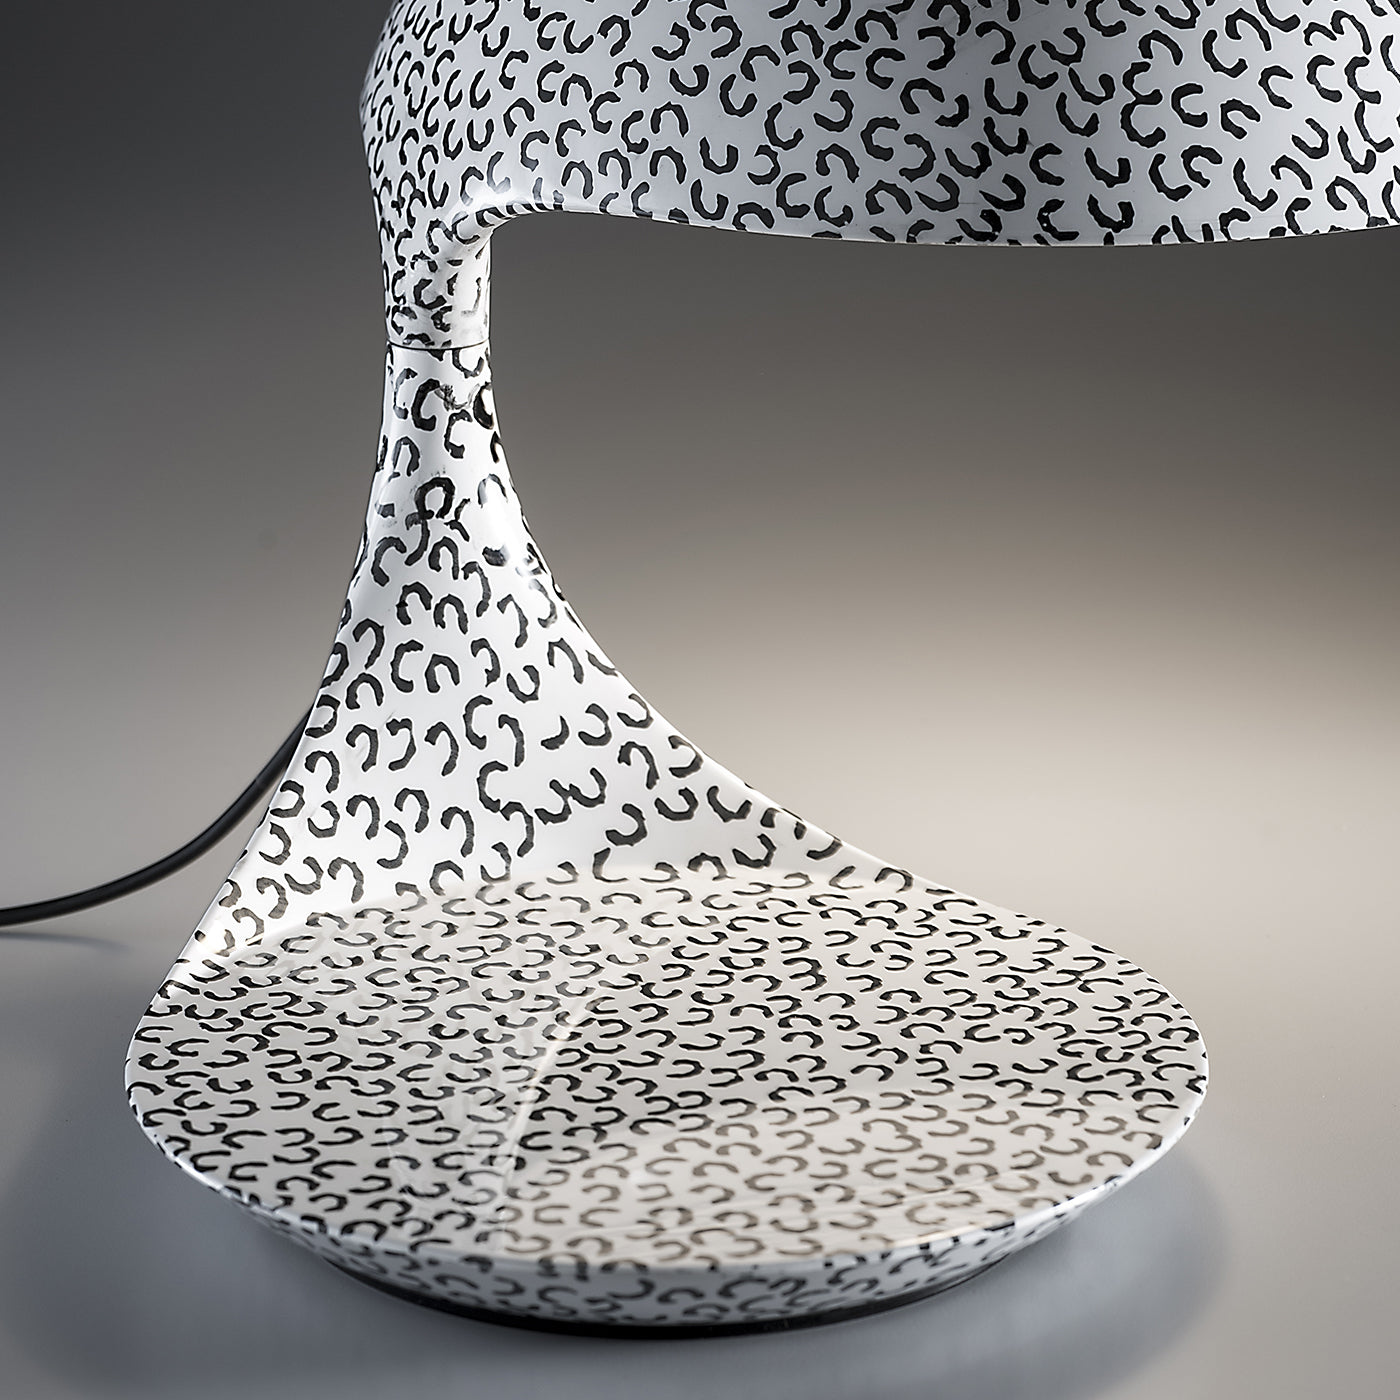 Cobra Texture Black-And-White Table Lamp by Paola Navone - Alternative view 1